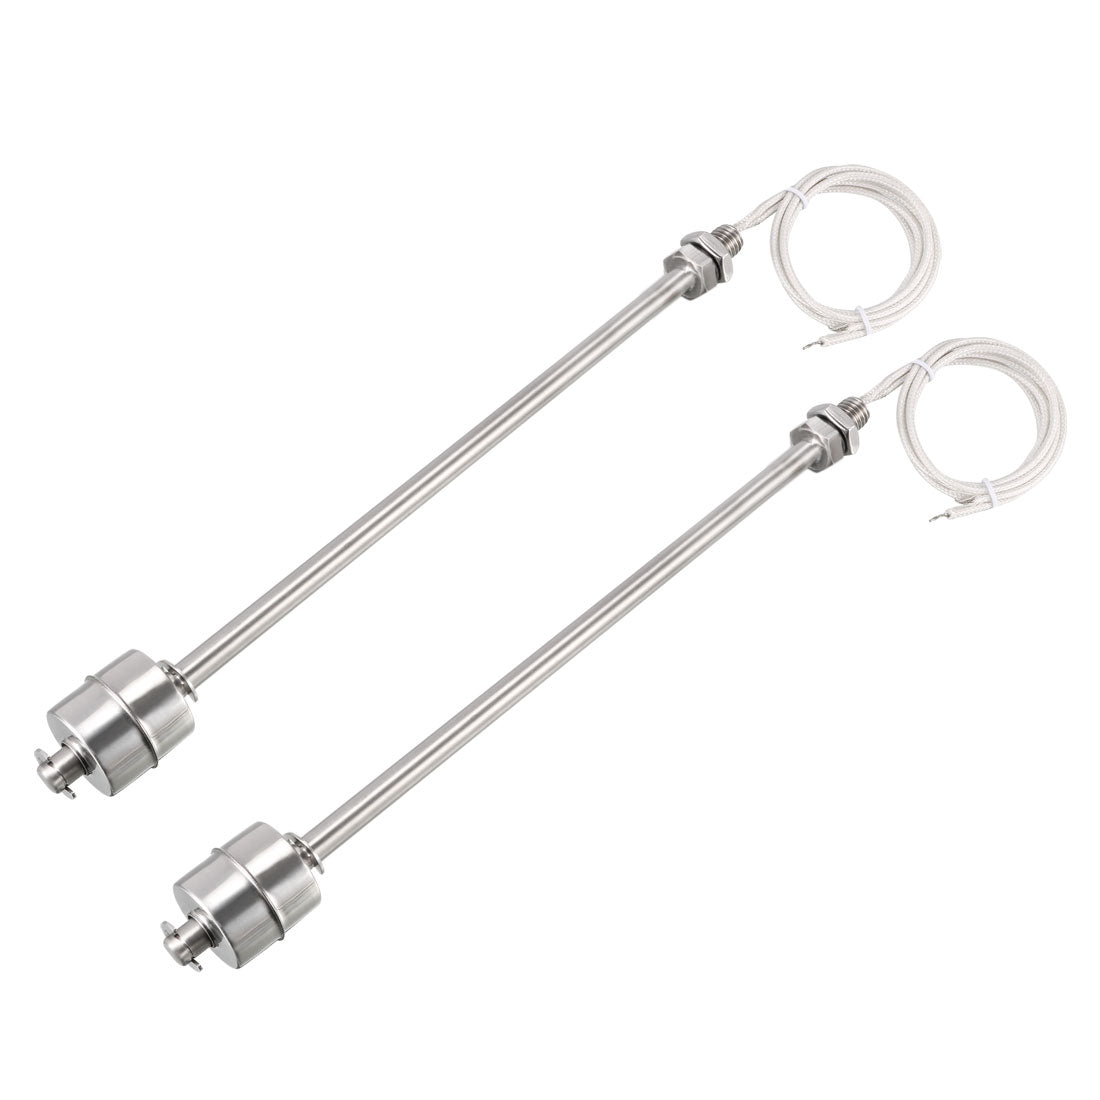 uxcell Uxcell 2PCS Stainless Steel Float Switch 270mm Fish Tank Vertical Water Level Sensor